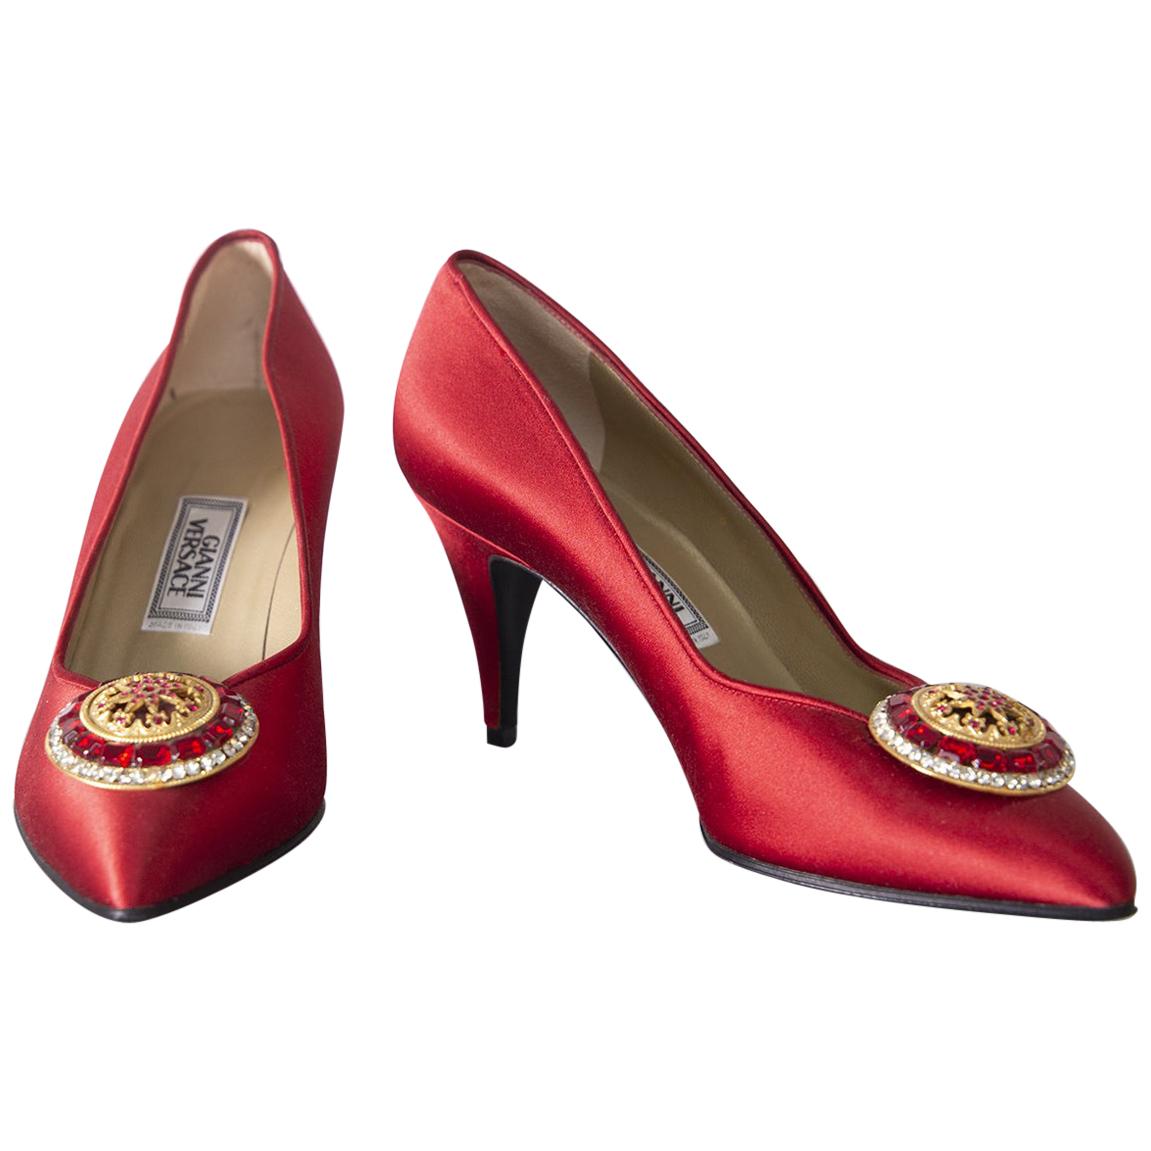 Gianni Versace Vintage Red Shoes with Jewel